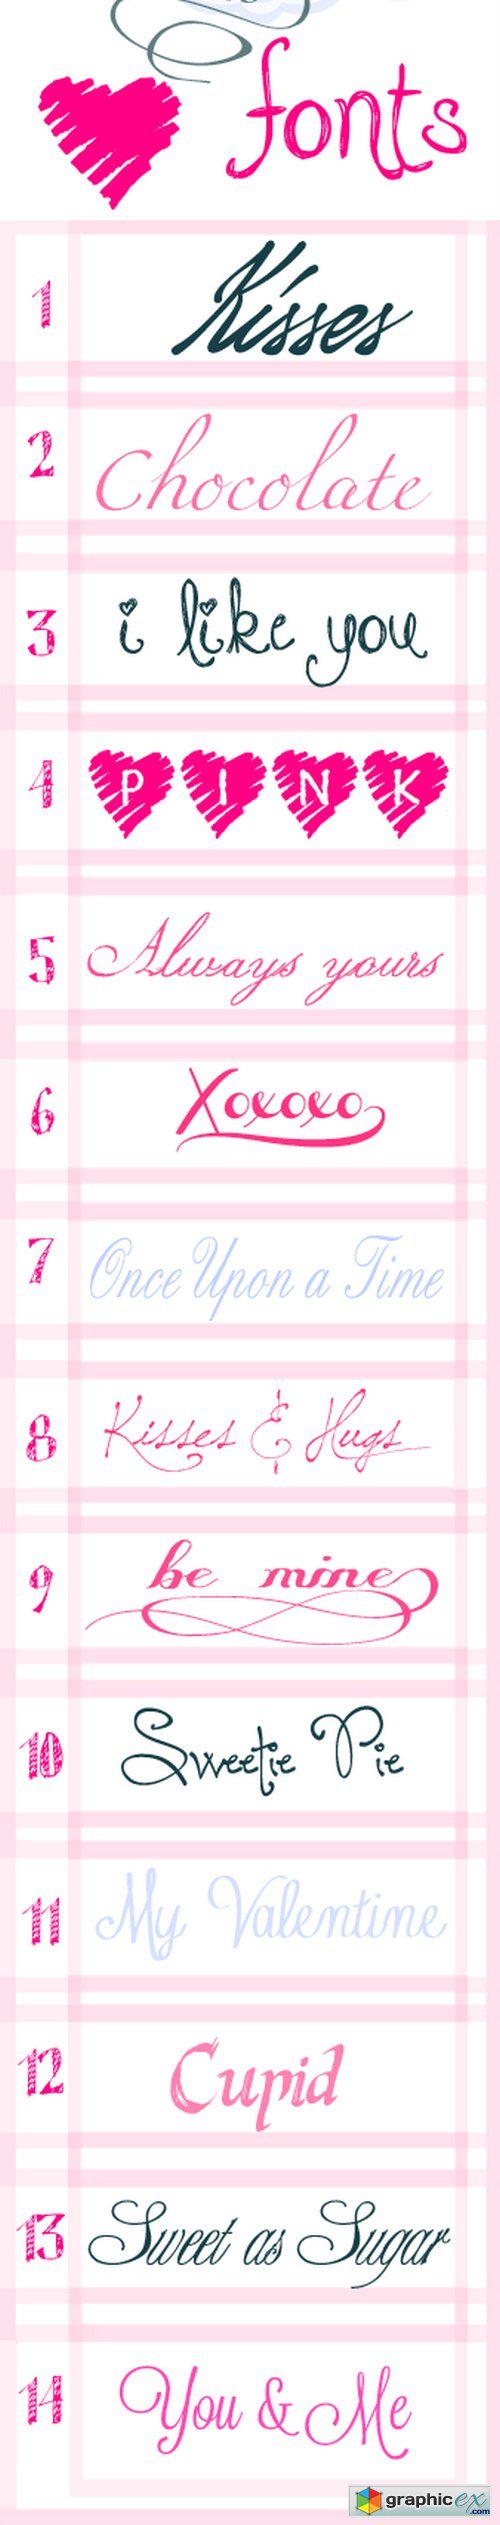 14 Romantic Fonts For Valentine s Day 000013